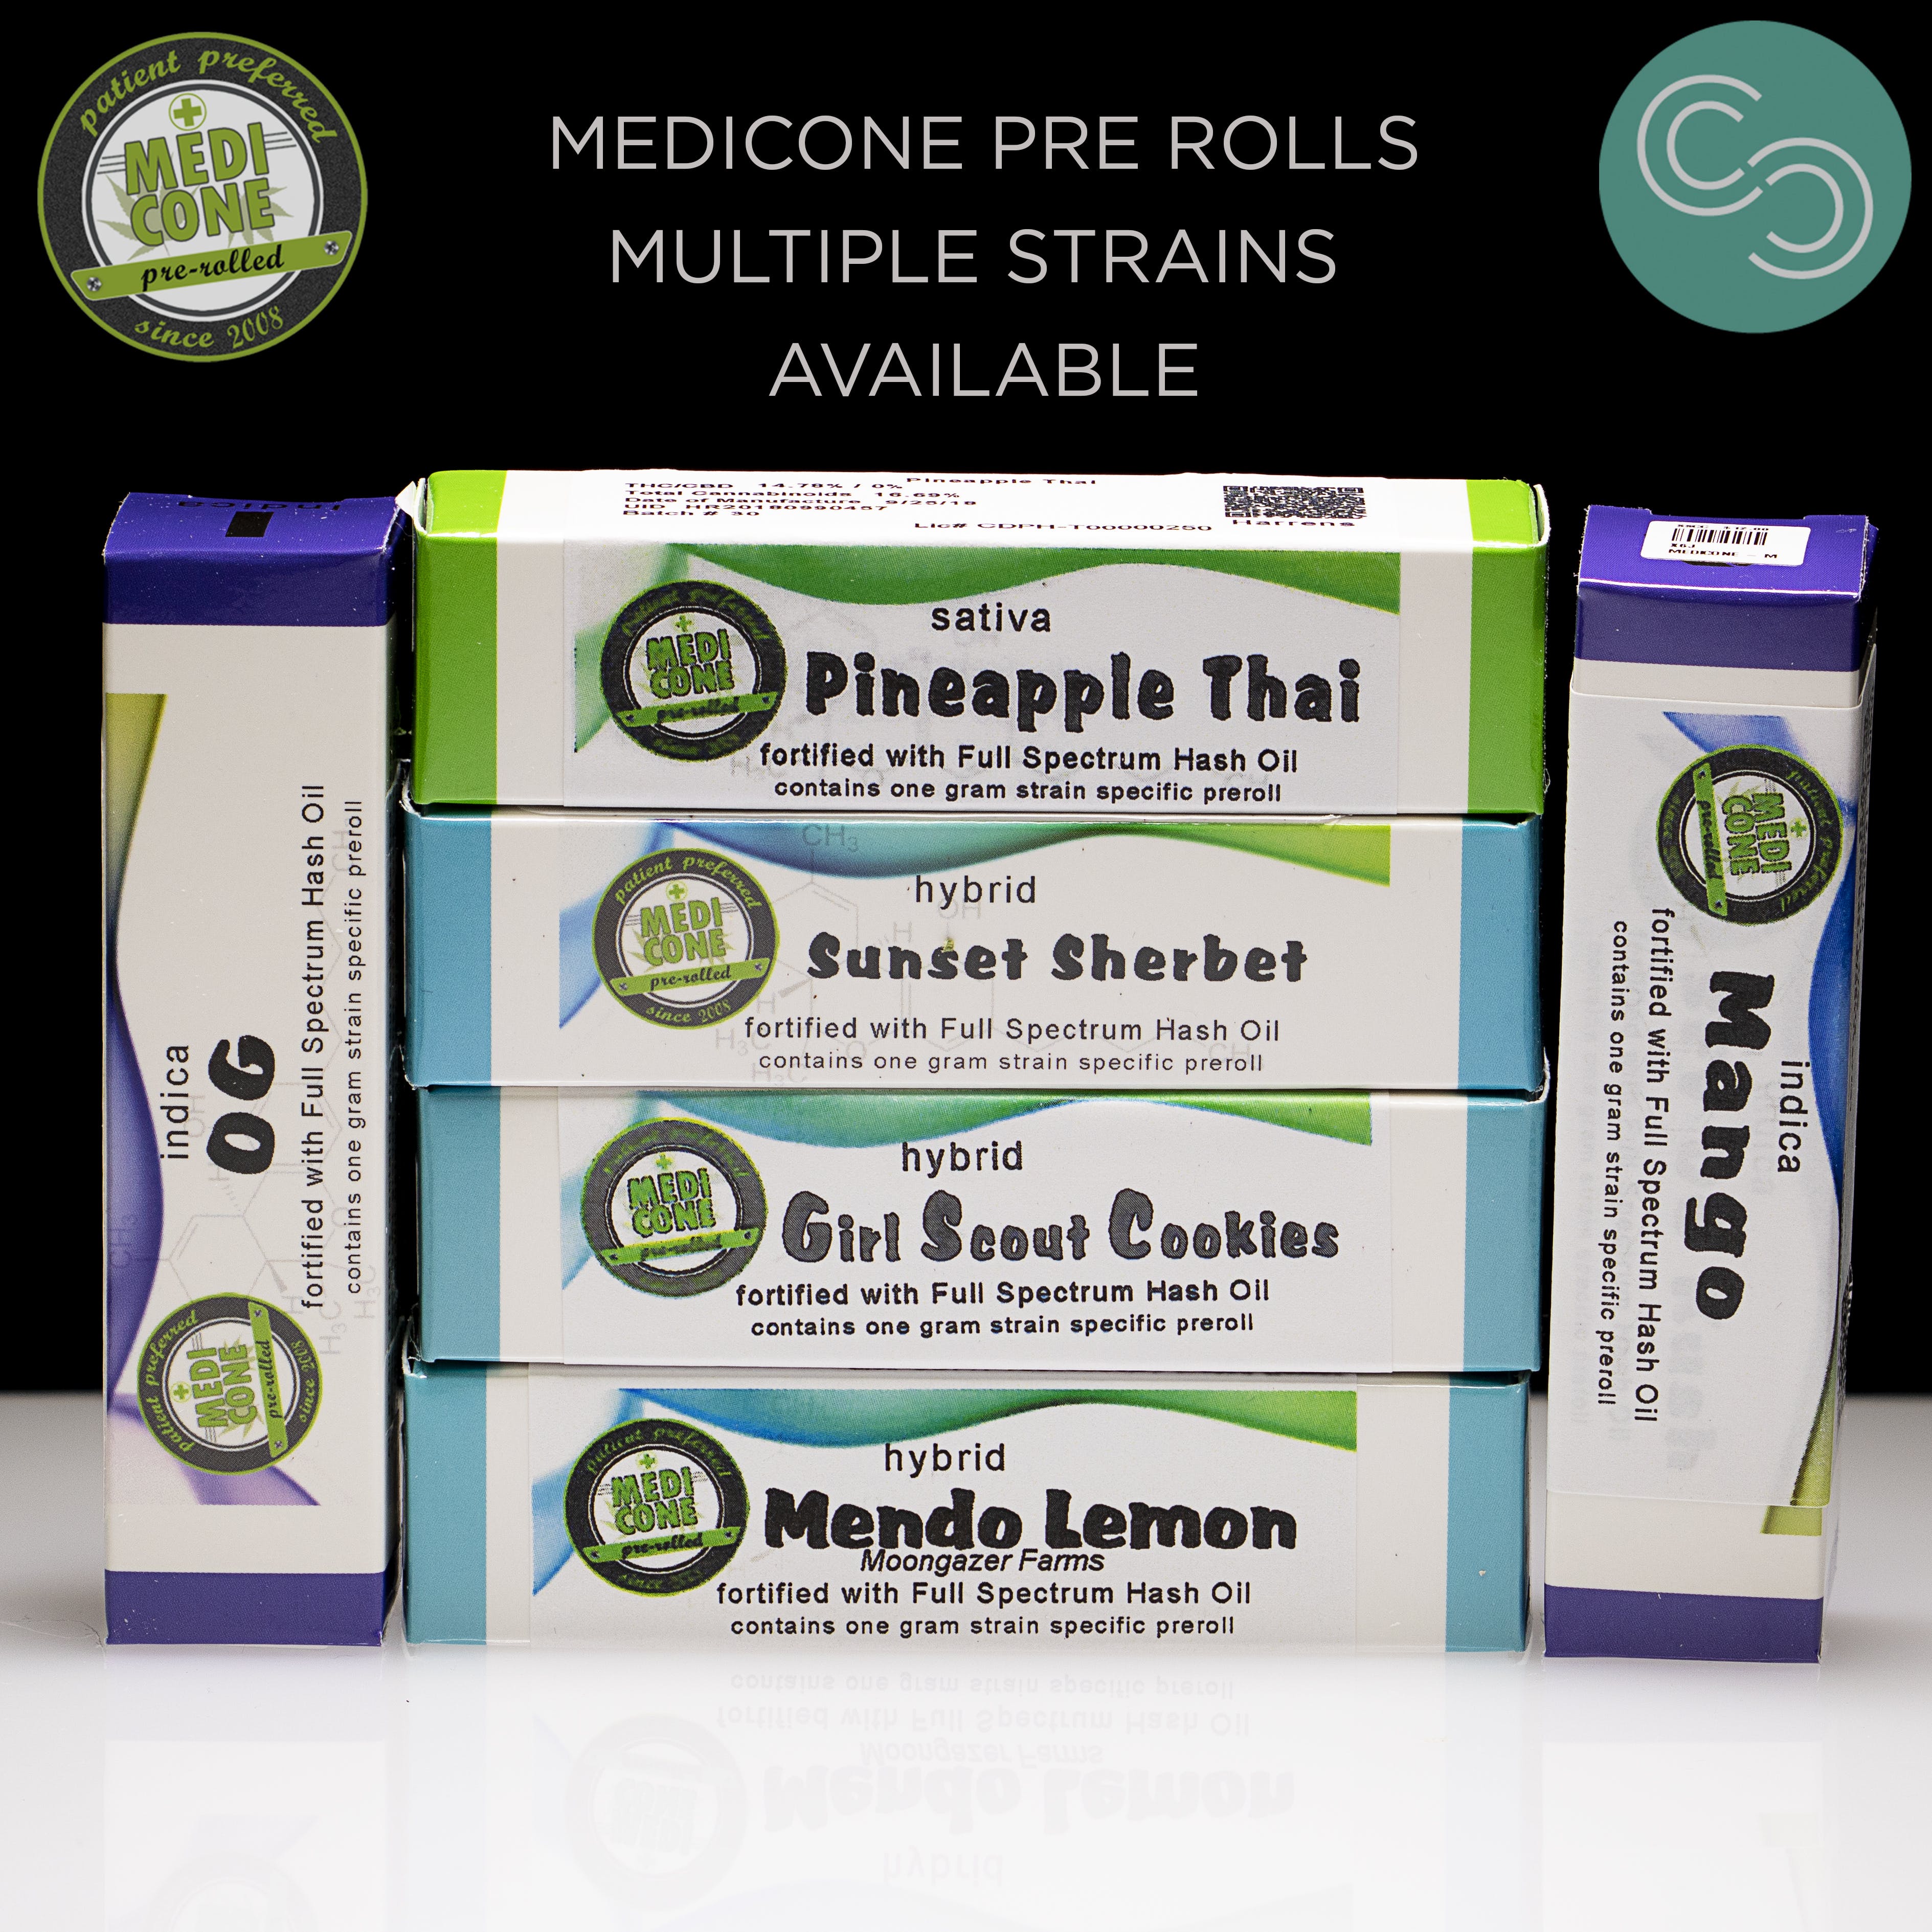 Medicone - Multiple strains available